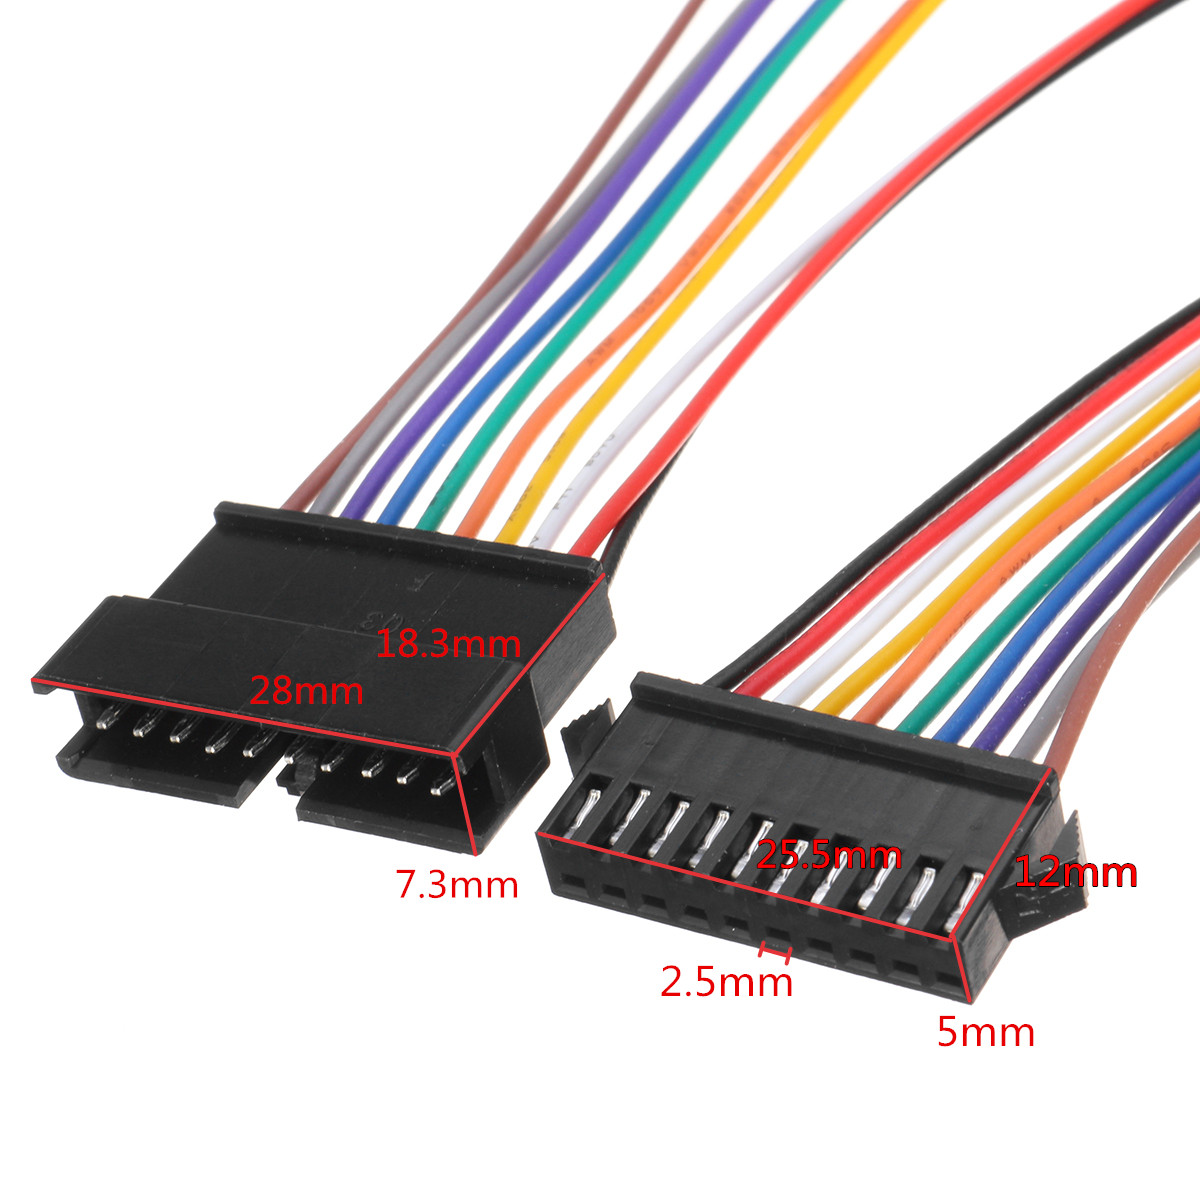 10-Set-Jst-25mm-SM-8-Pin-Male--Female-Connector-Plug-With-Wire-Cable-300mm-1170148-8